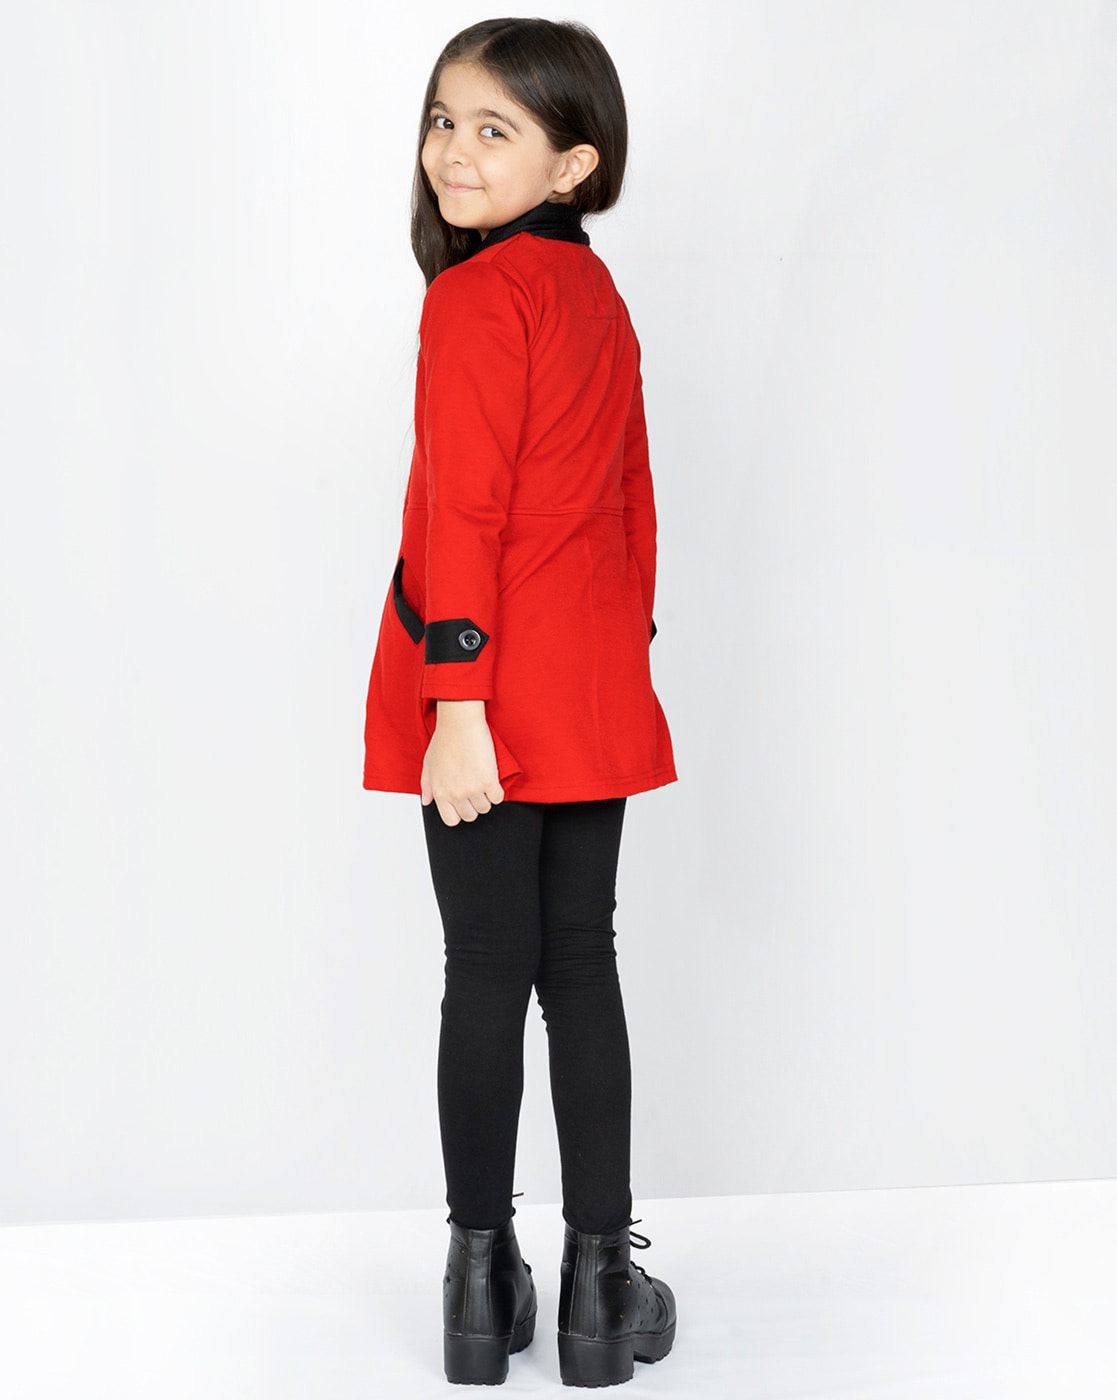 Shop Online Girls Red Solid Full-Sleeve Puffer Jacket at ₹889